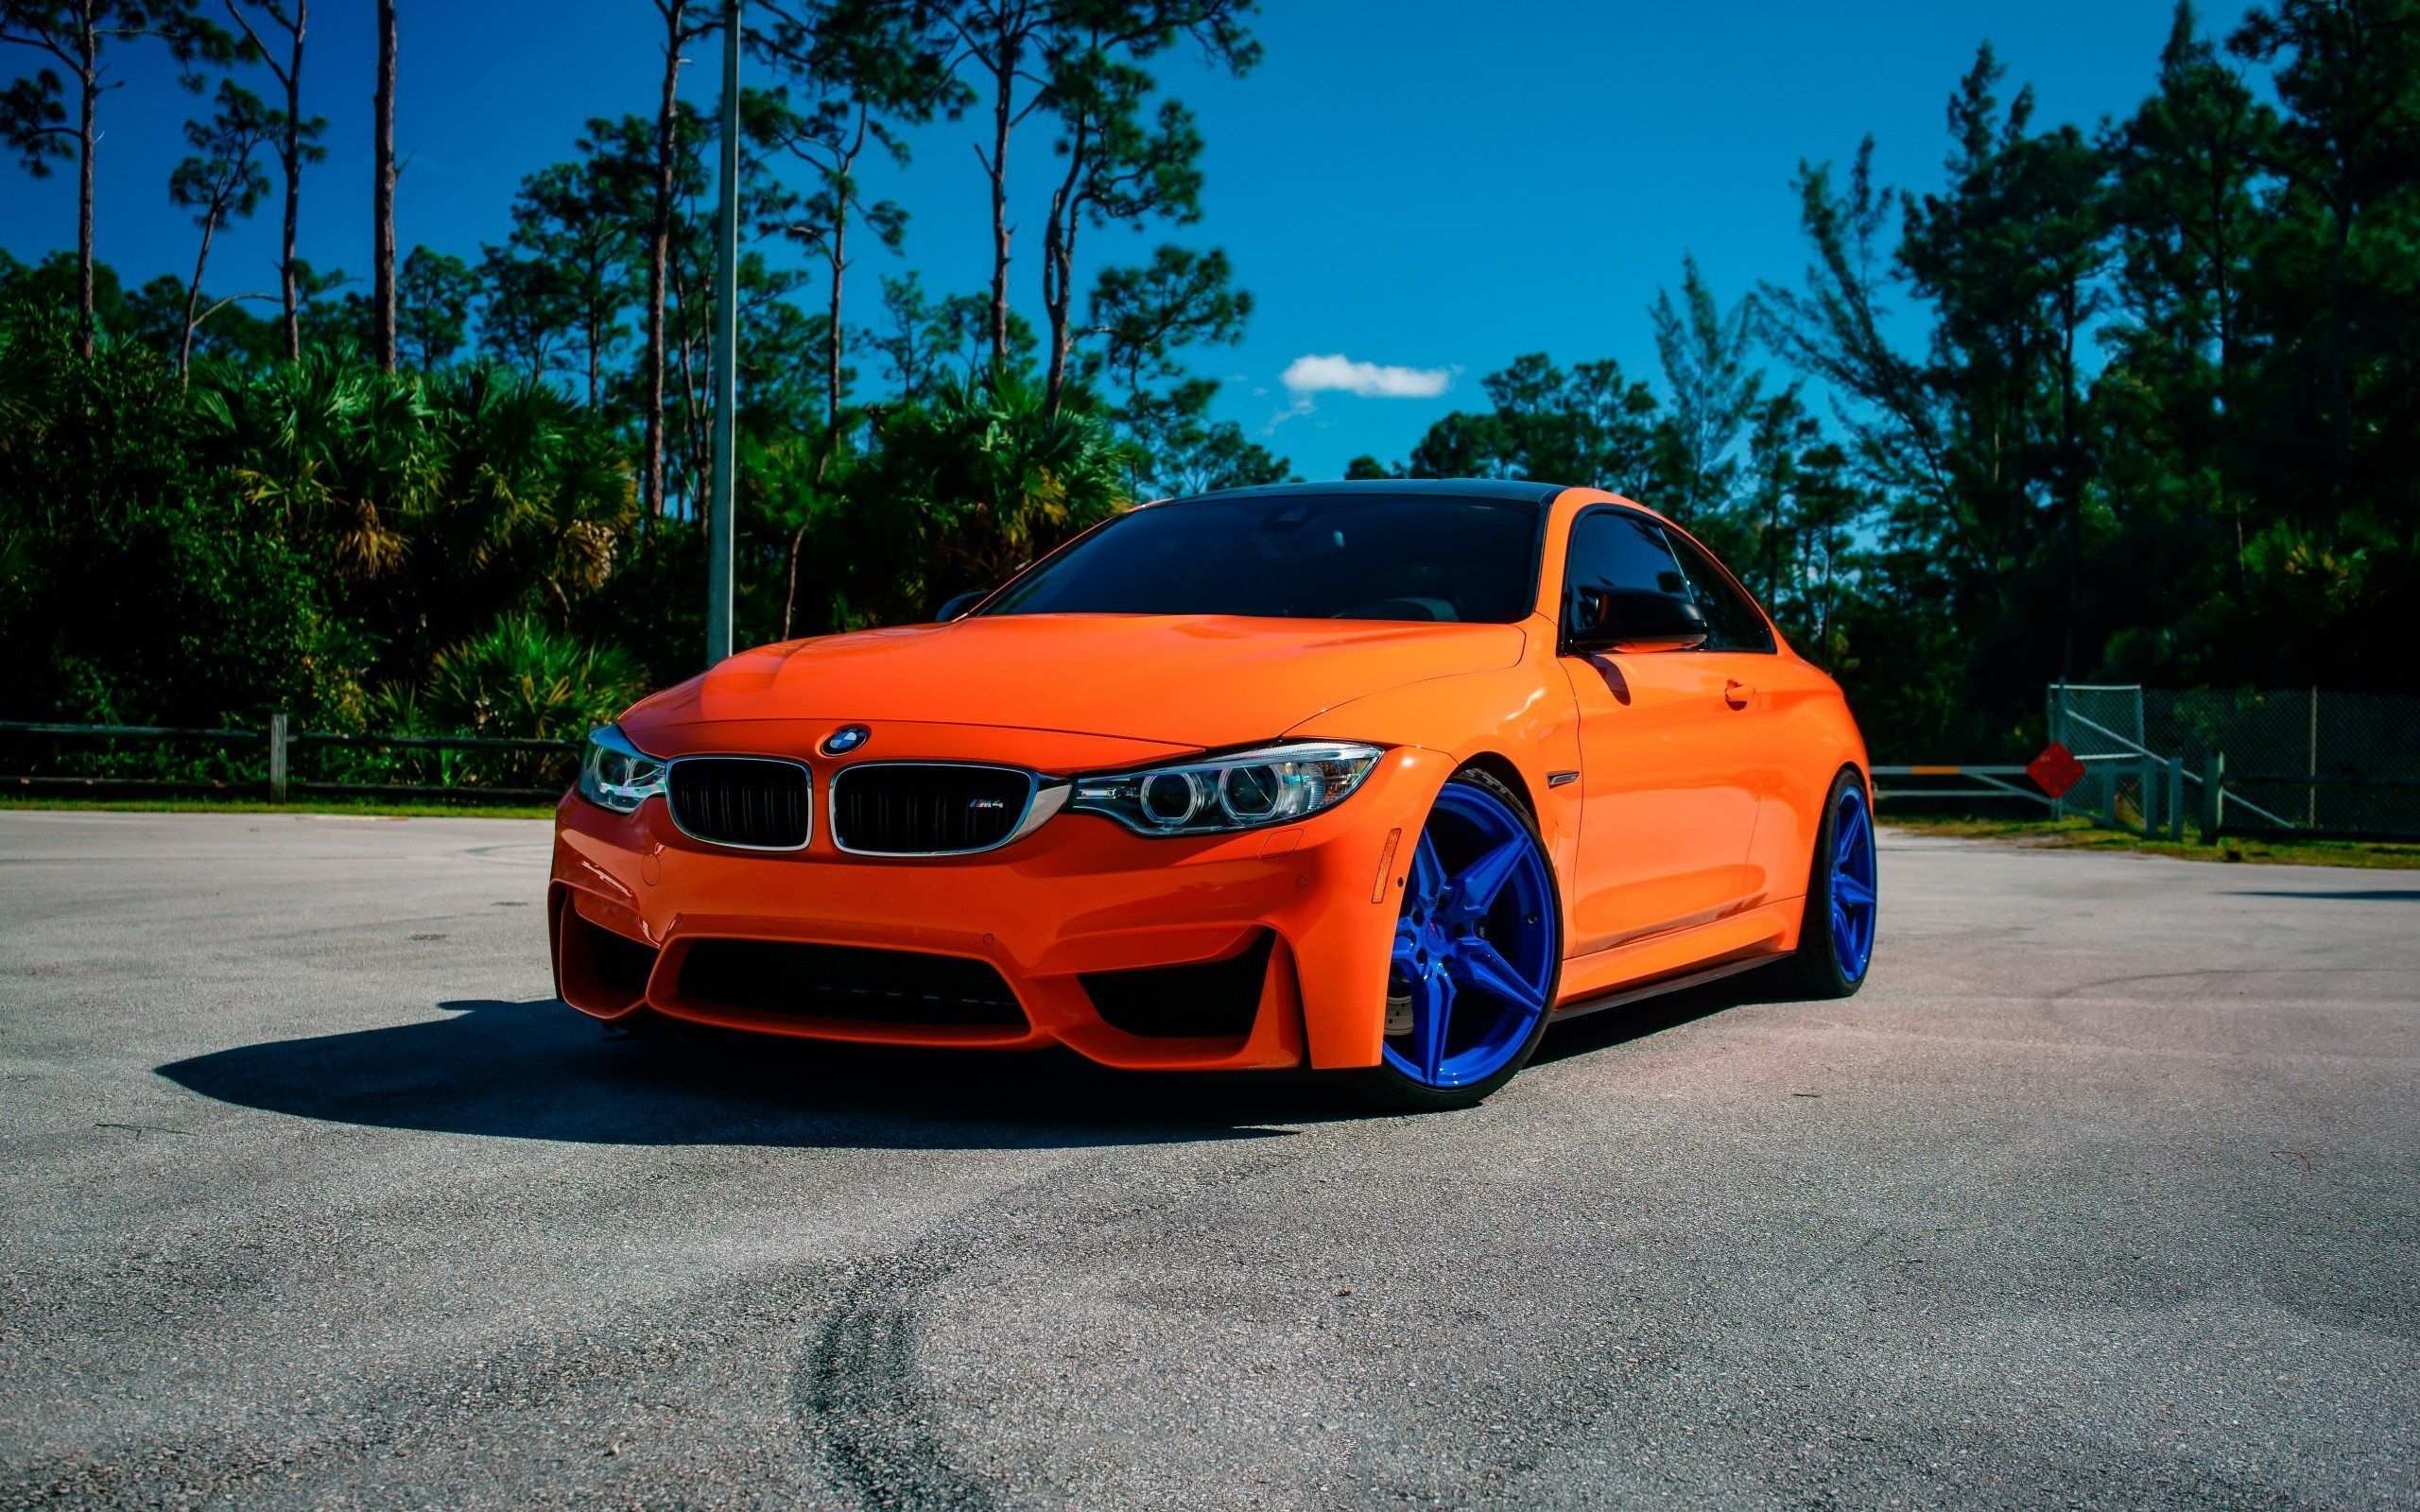 Download Wallpaper Tuning, Bmw M Orange Bmw, Blue Discs, Incurve, Wheels, Lp 5 For Desktop With Resolution 2560x1600. High Quality HD Picture Wallpaper